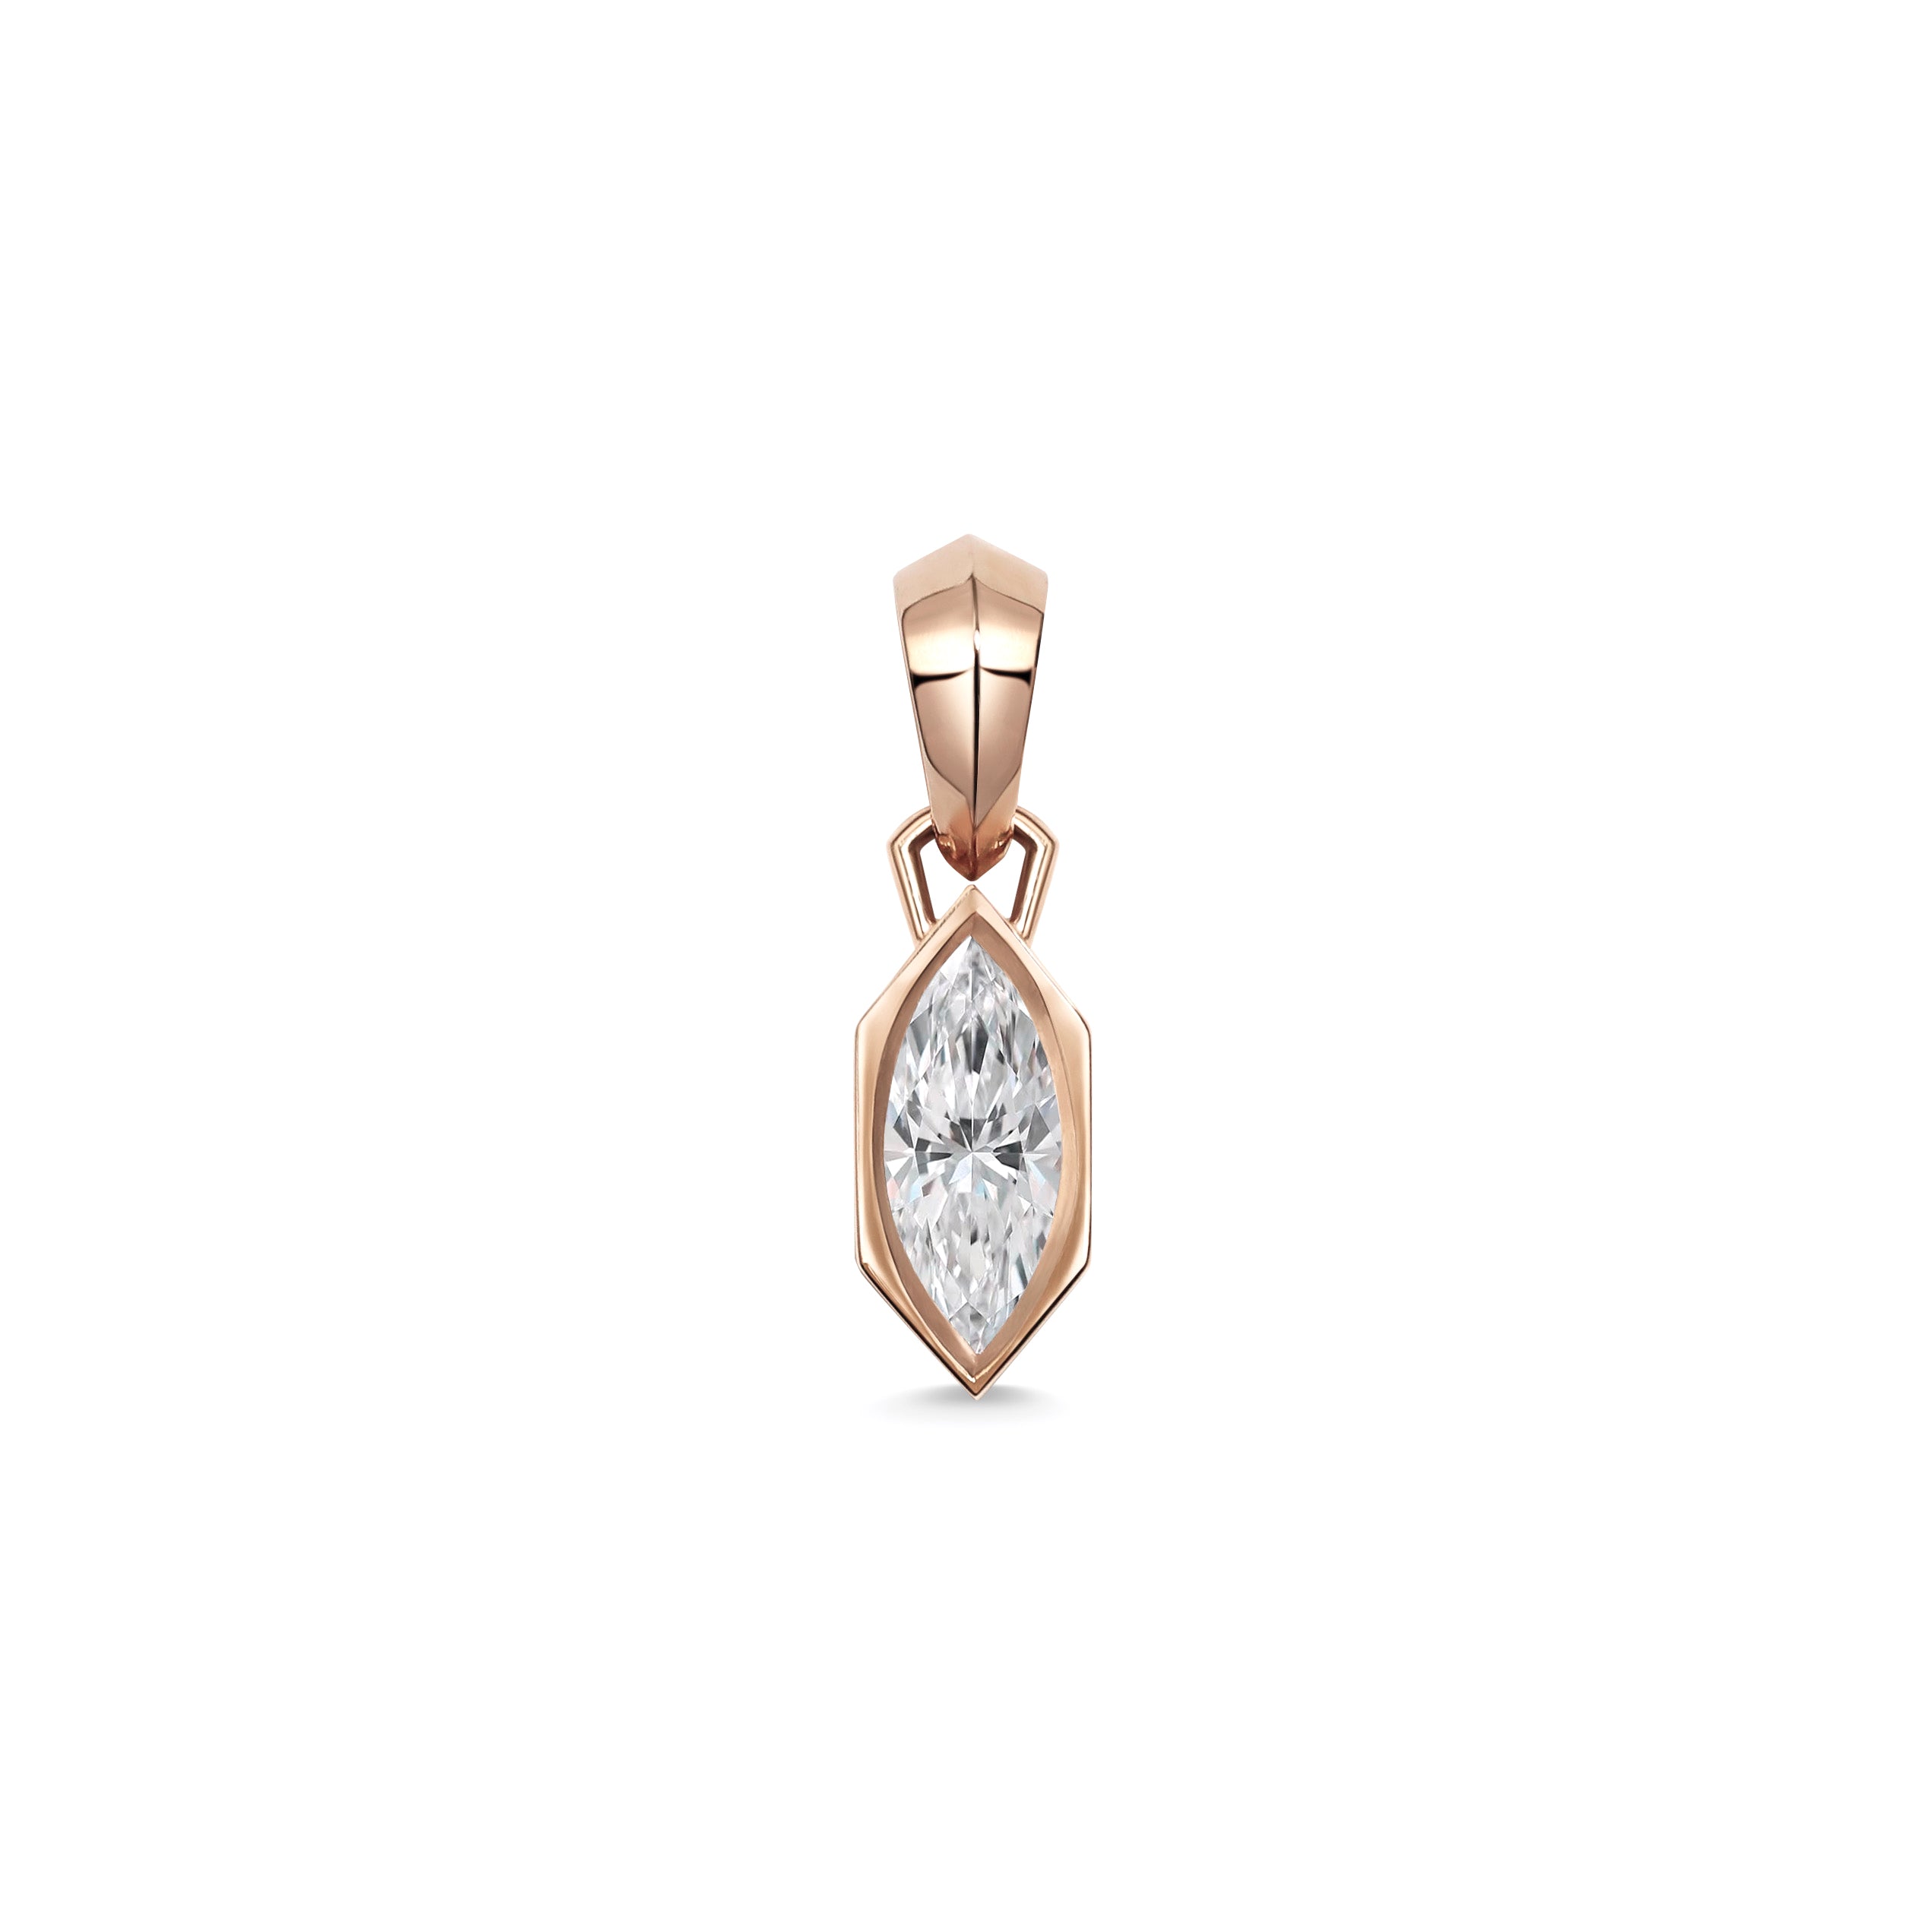 The Chunky Charm Pendant - Marquise Cut by East London jeweller Rachel Boston | Discover our collections of unique and timeless engagement rings, wedding rings, and modern fine jewellery.